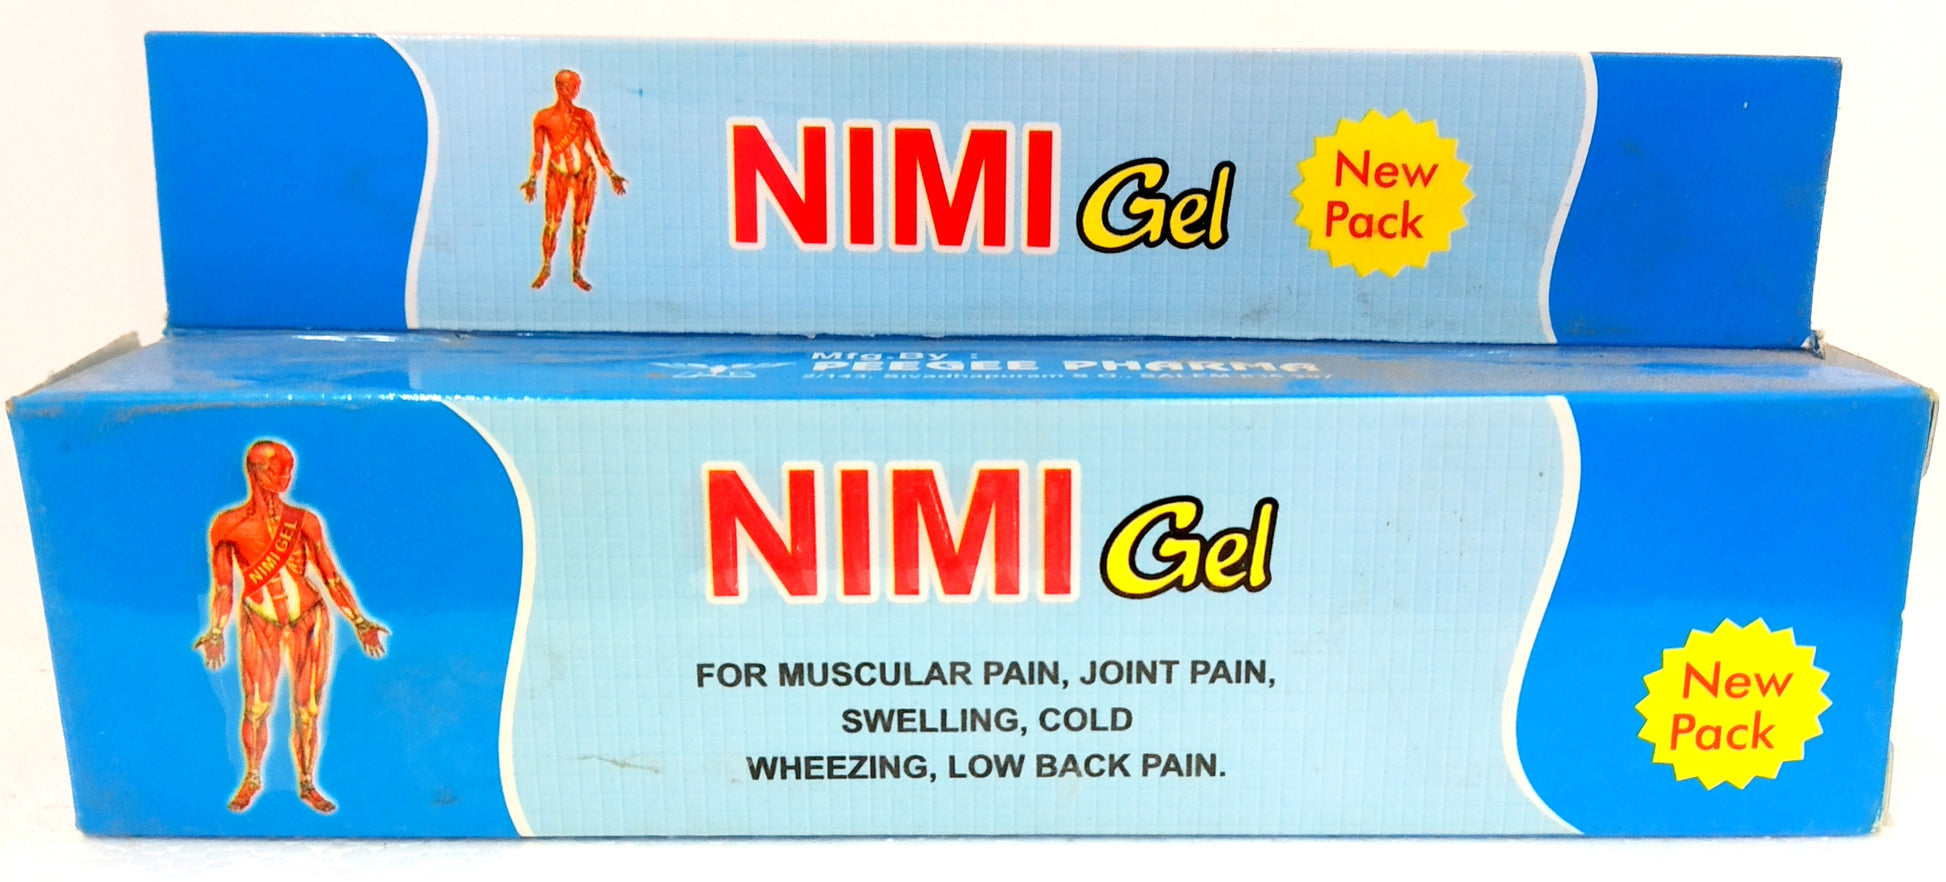 Shop Nimi Gel 15gm at price 41.00 from Peegee Online - Ayush Care